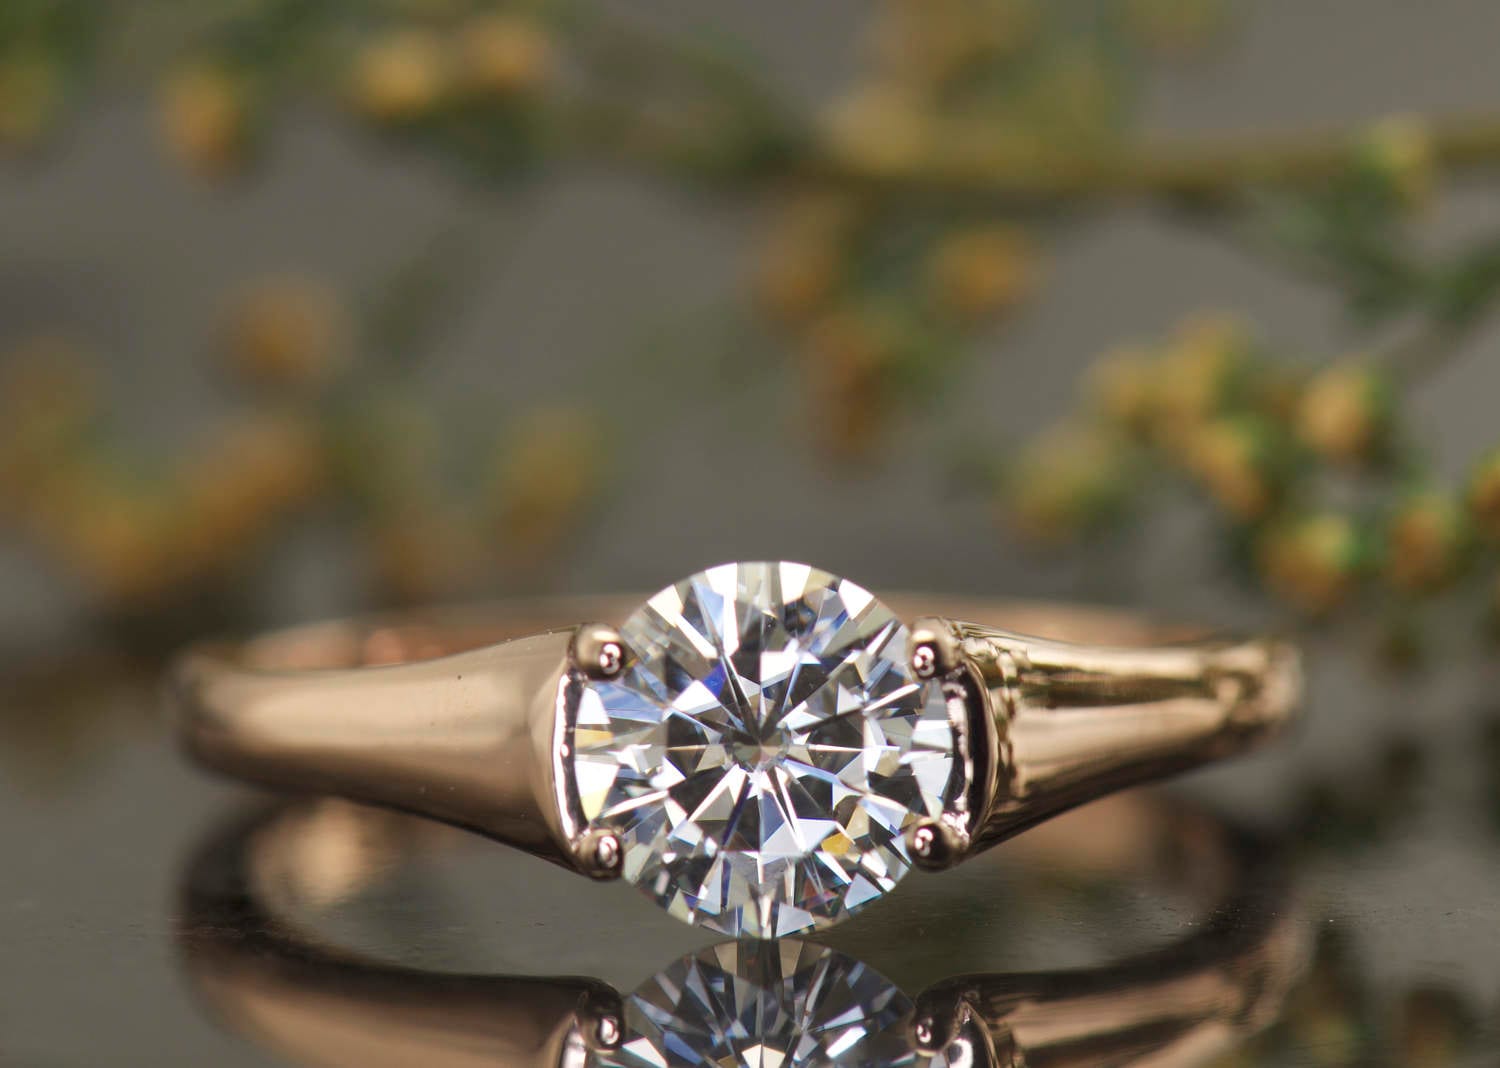 Low Profile French Cut Round Diamond Engagement Ring - BC Clark